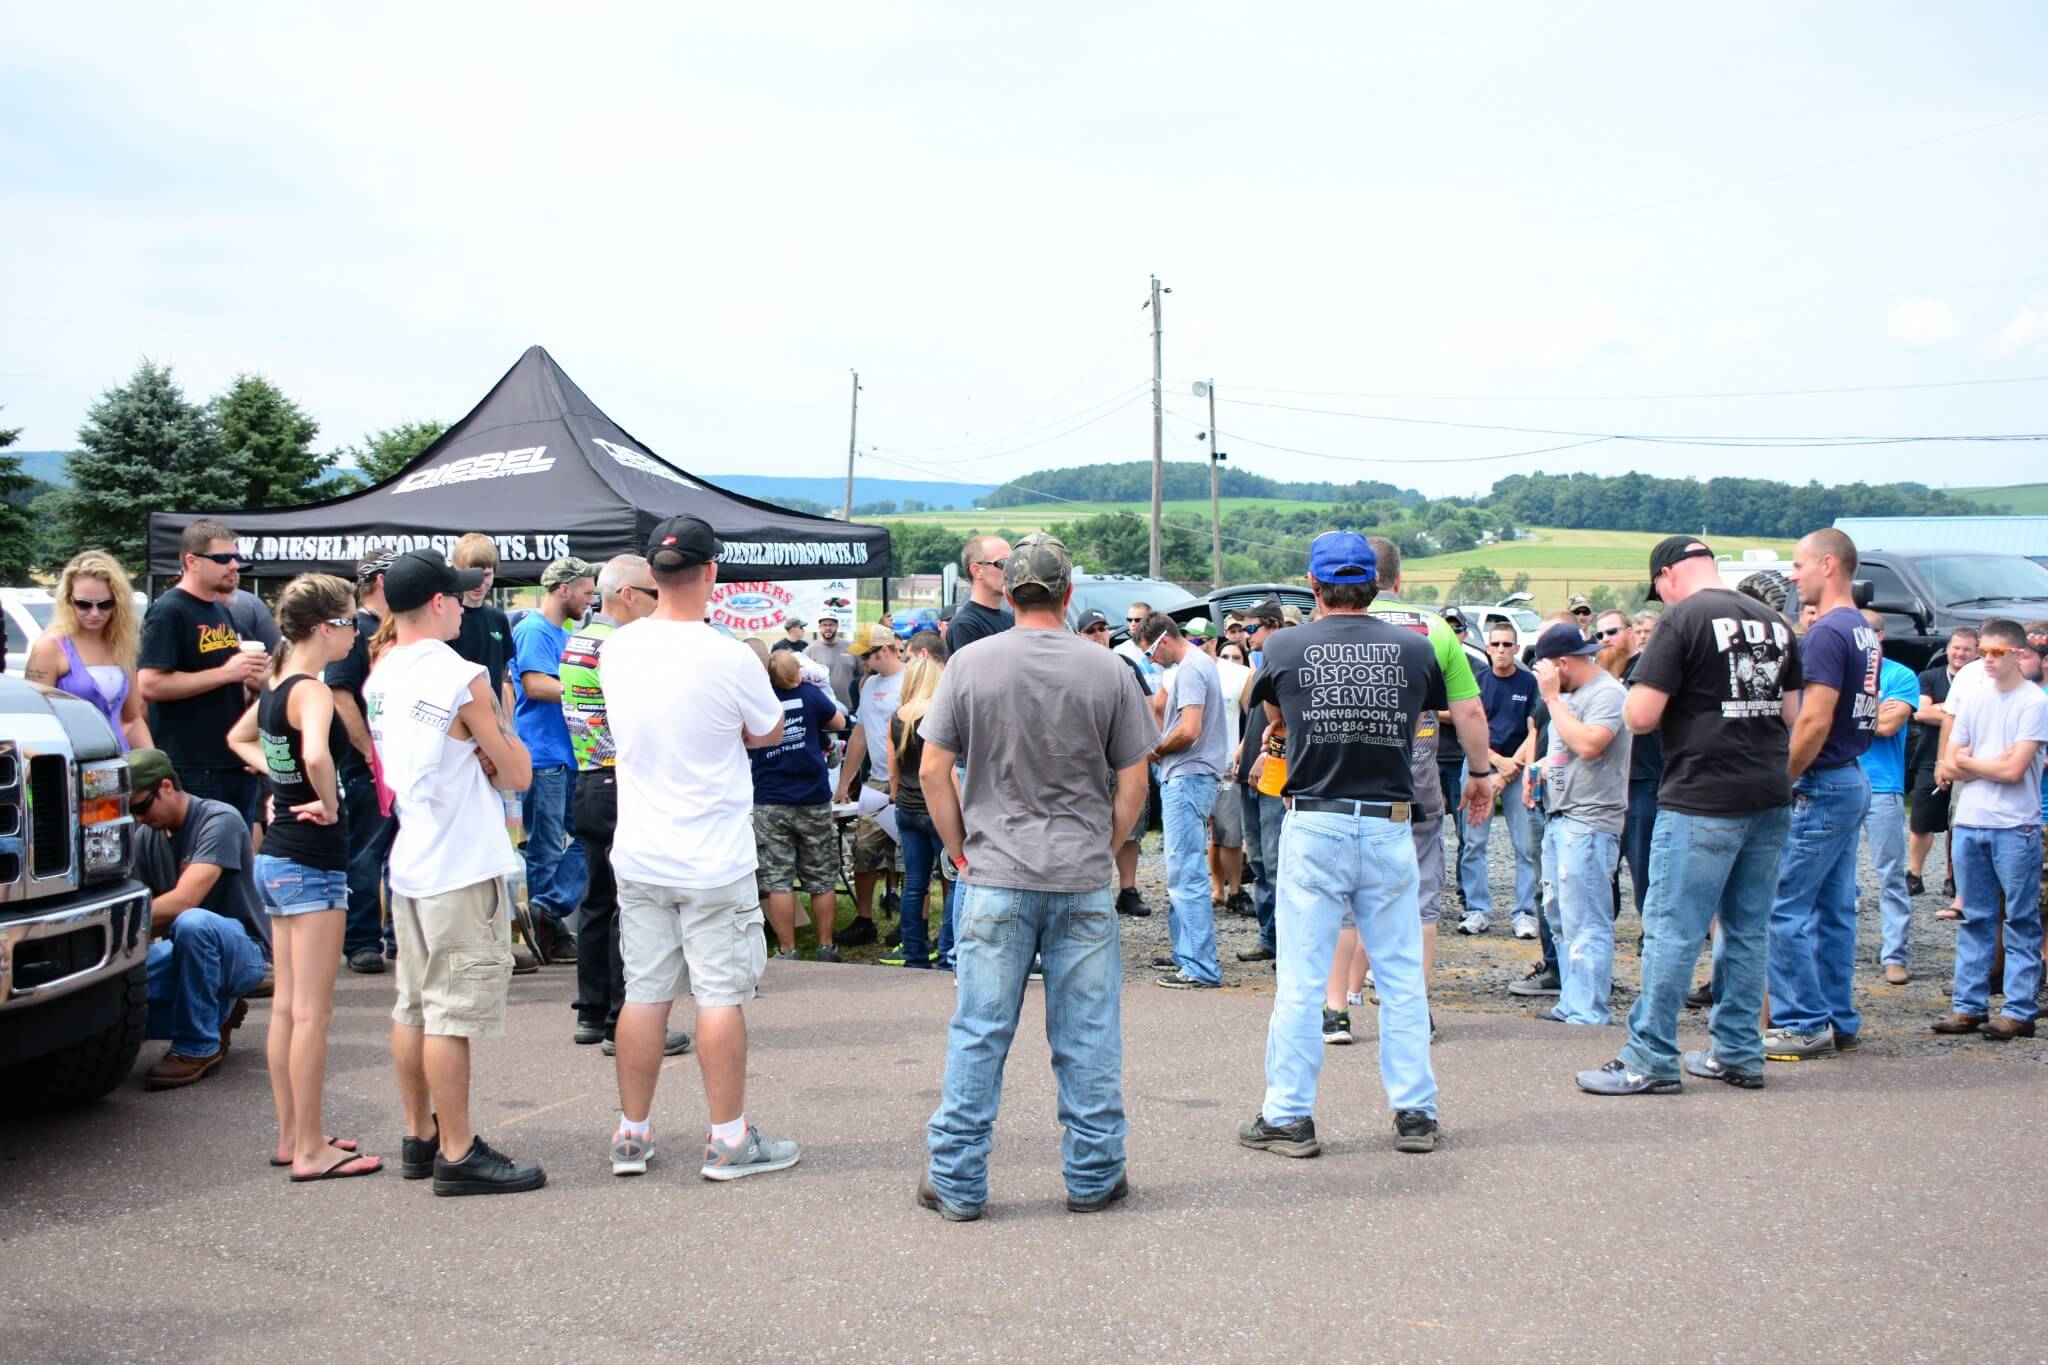 Here you see the drivers’ meeting with track/Diesel Motorsports officials before the elimination rounds of the diesel-only drag racing.